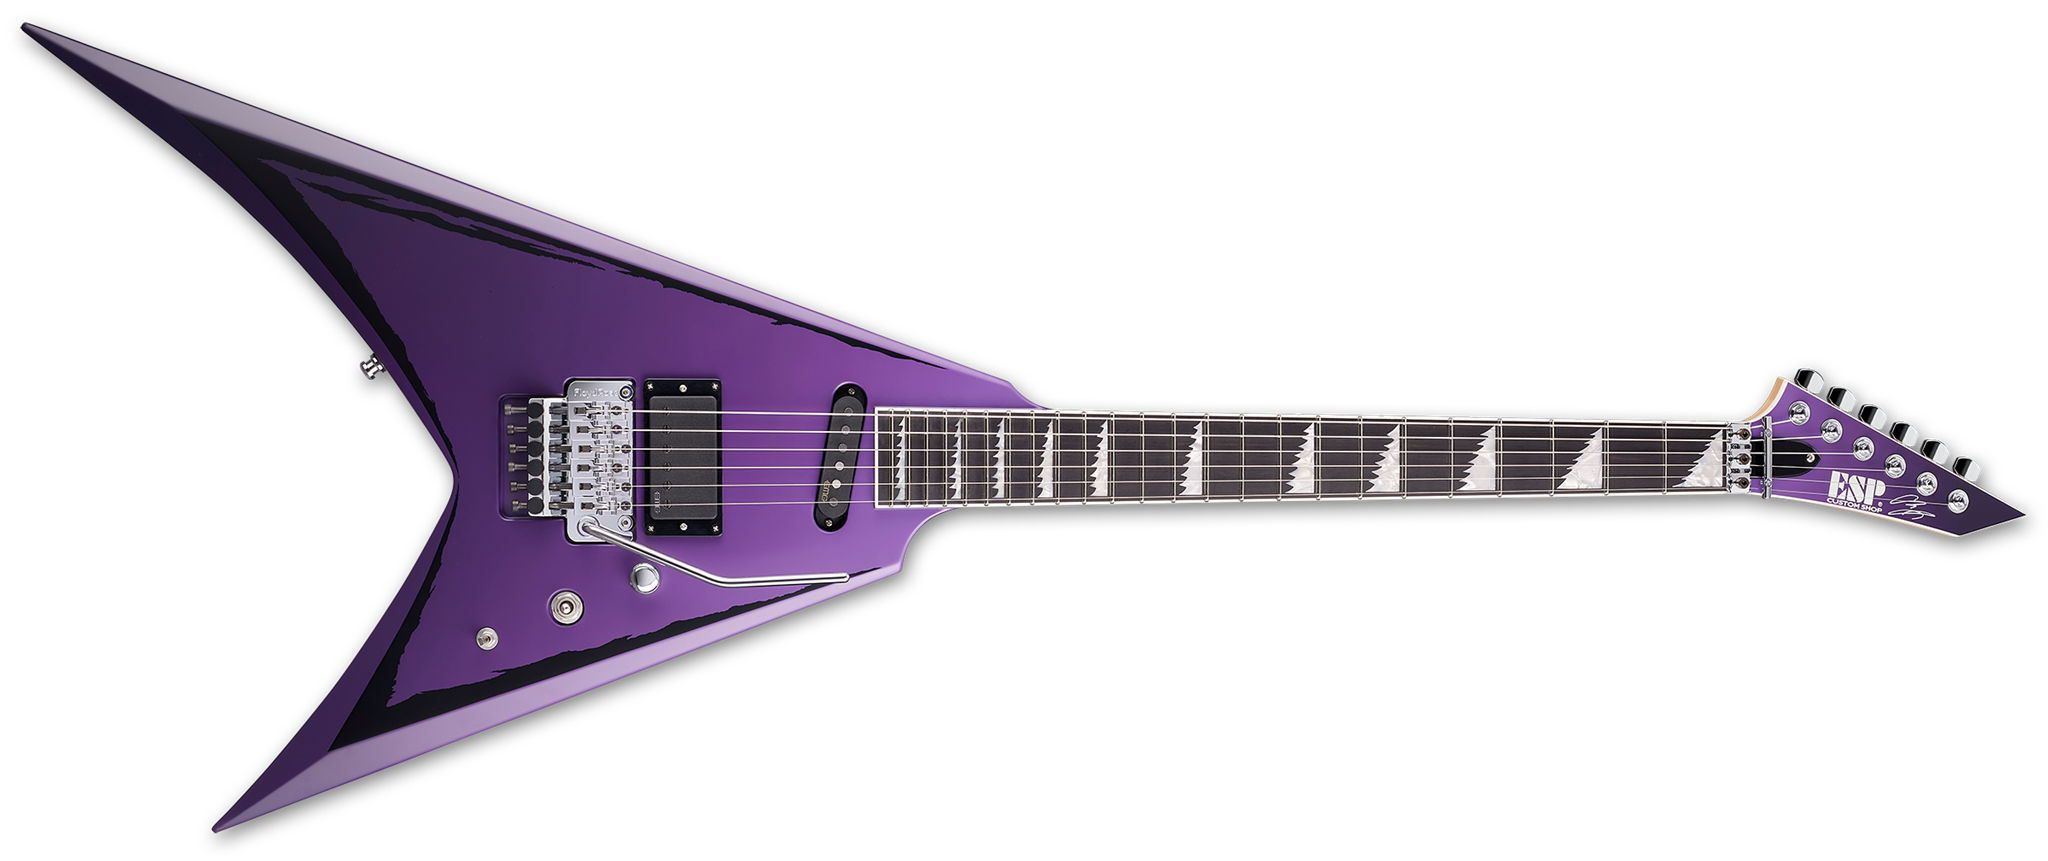 ESP Alexi Ripped Purple Fade Satin w/Ripped Pinstripes 6-String Electric Guitar 2021